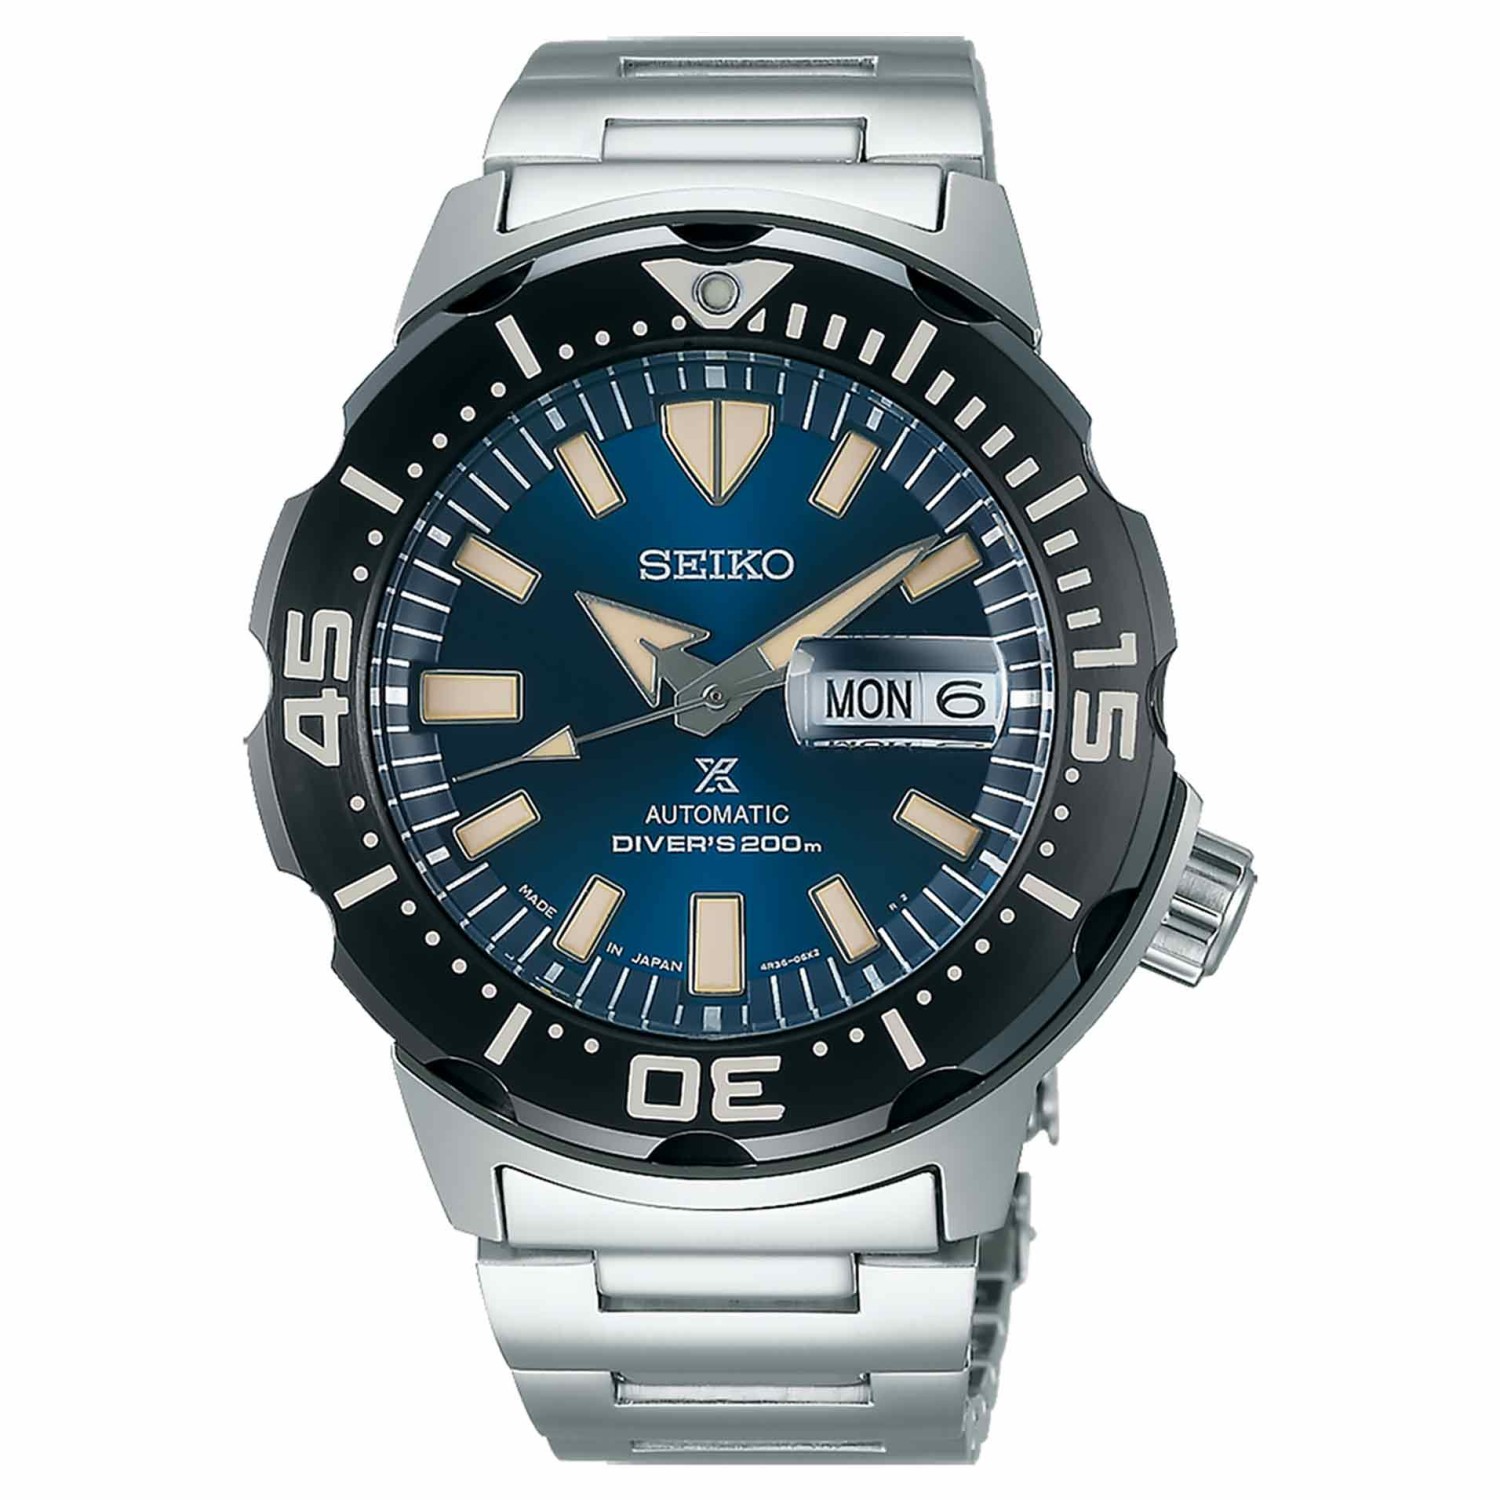 SRPD25K SEIKO Prospex Automatic PROSPEX Monster Divers Watch. The Seiko SRPD25K Dive Watch is available at your Seiko Dive Watch Specialist  - Christies Papatoetoe and Watch Station Manukau3 Months No Payments and Interest for Q Card holders Oxipay is sim